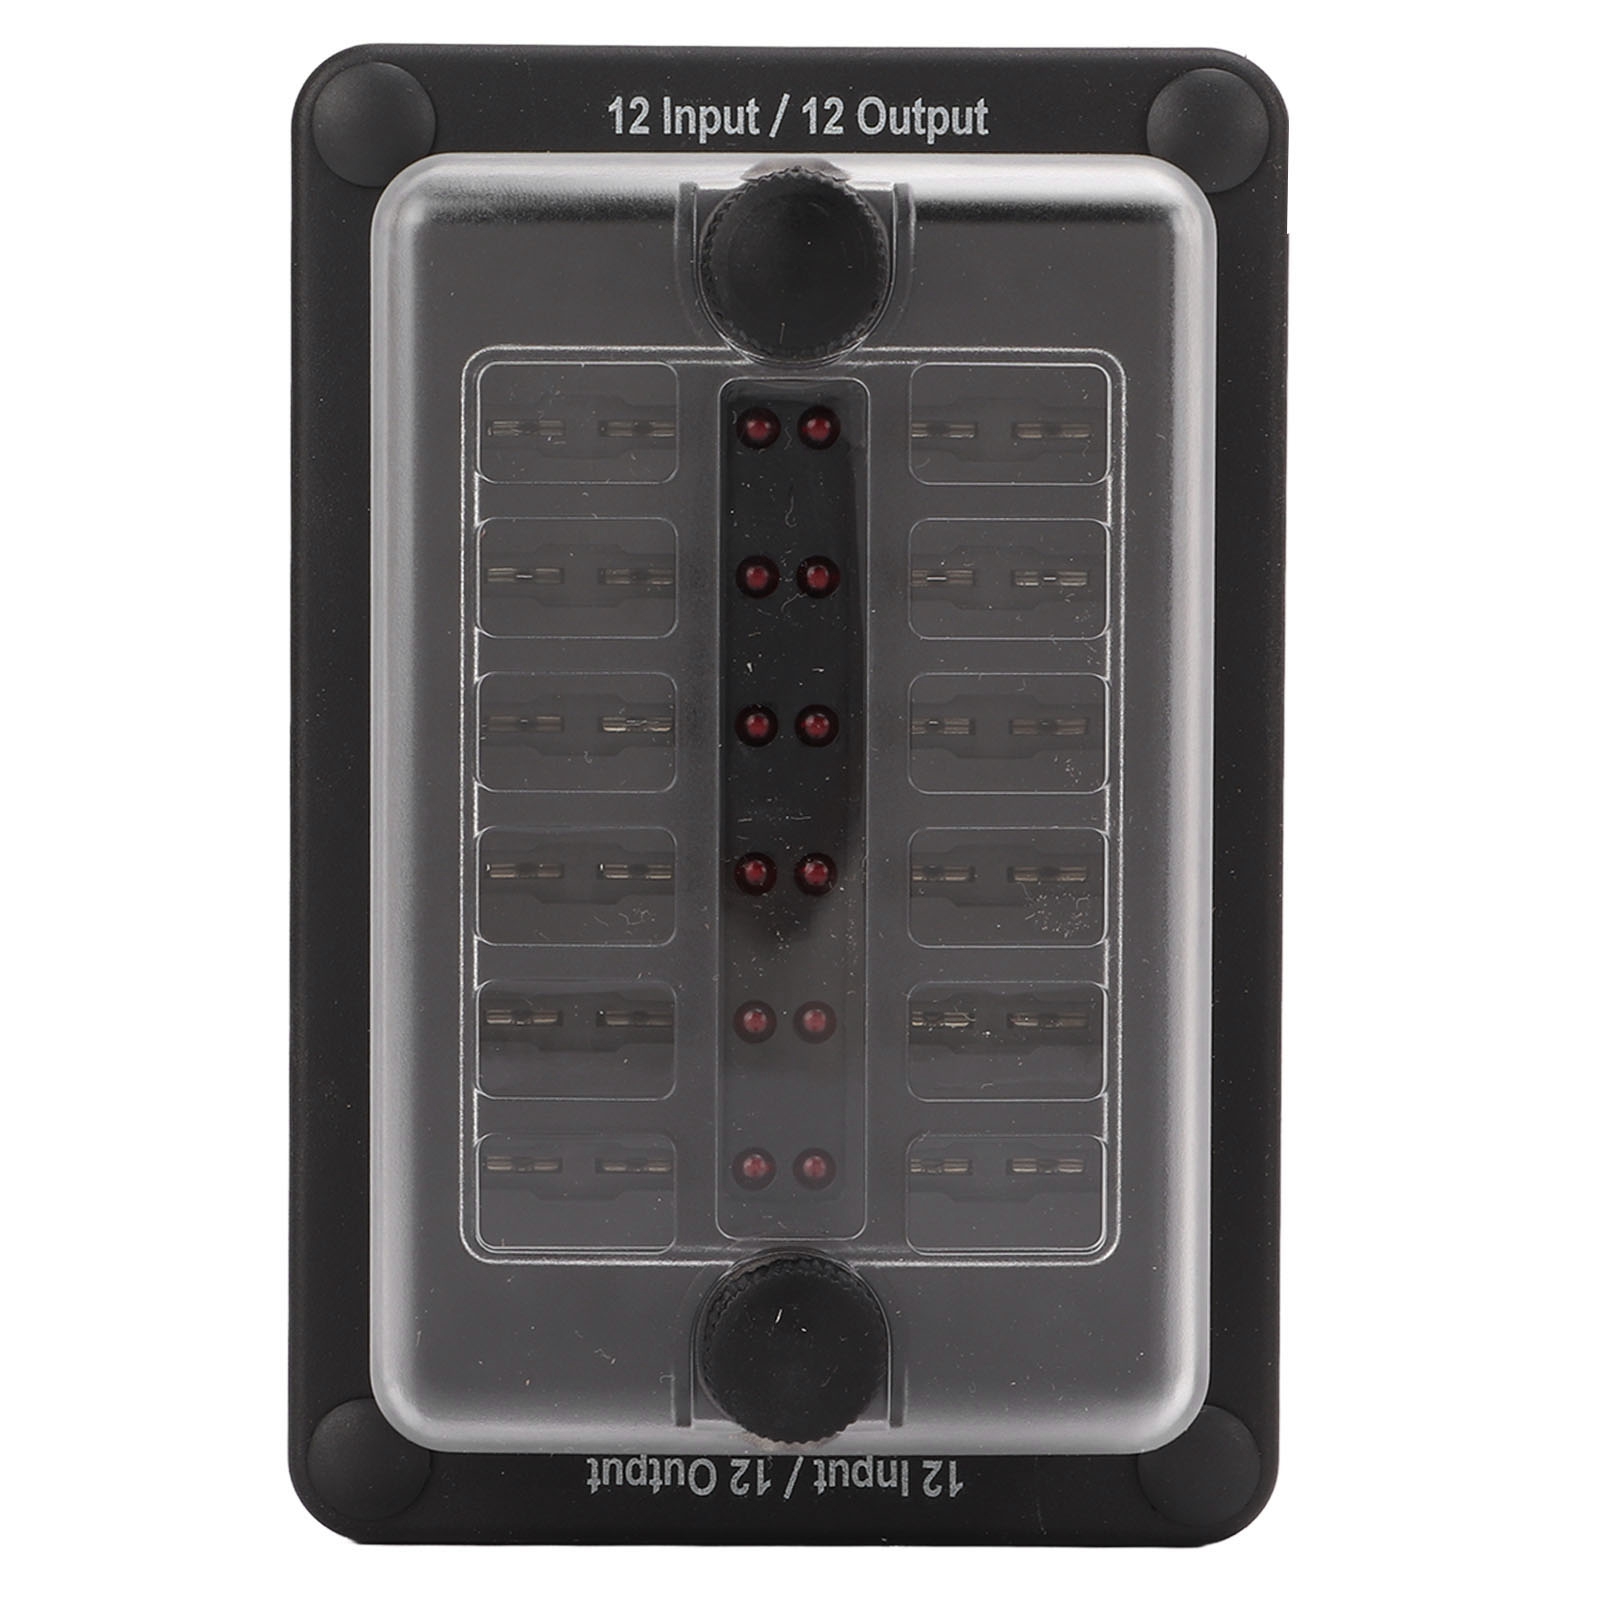 12 Way Fuse Block, Electrical Protection 12 In 12 Out Auto ATO ATC Fuse Box  20A Maximum Current Waterproof For RVs